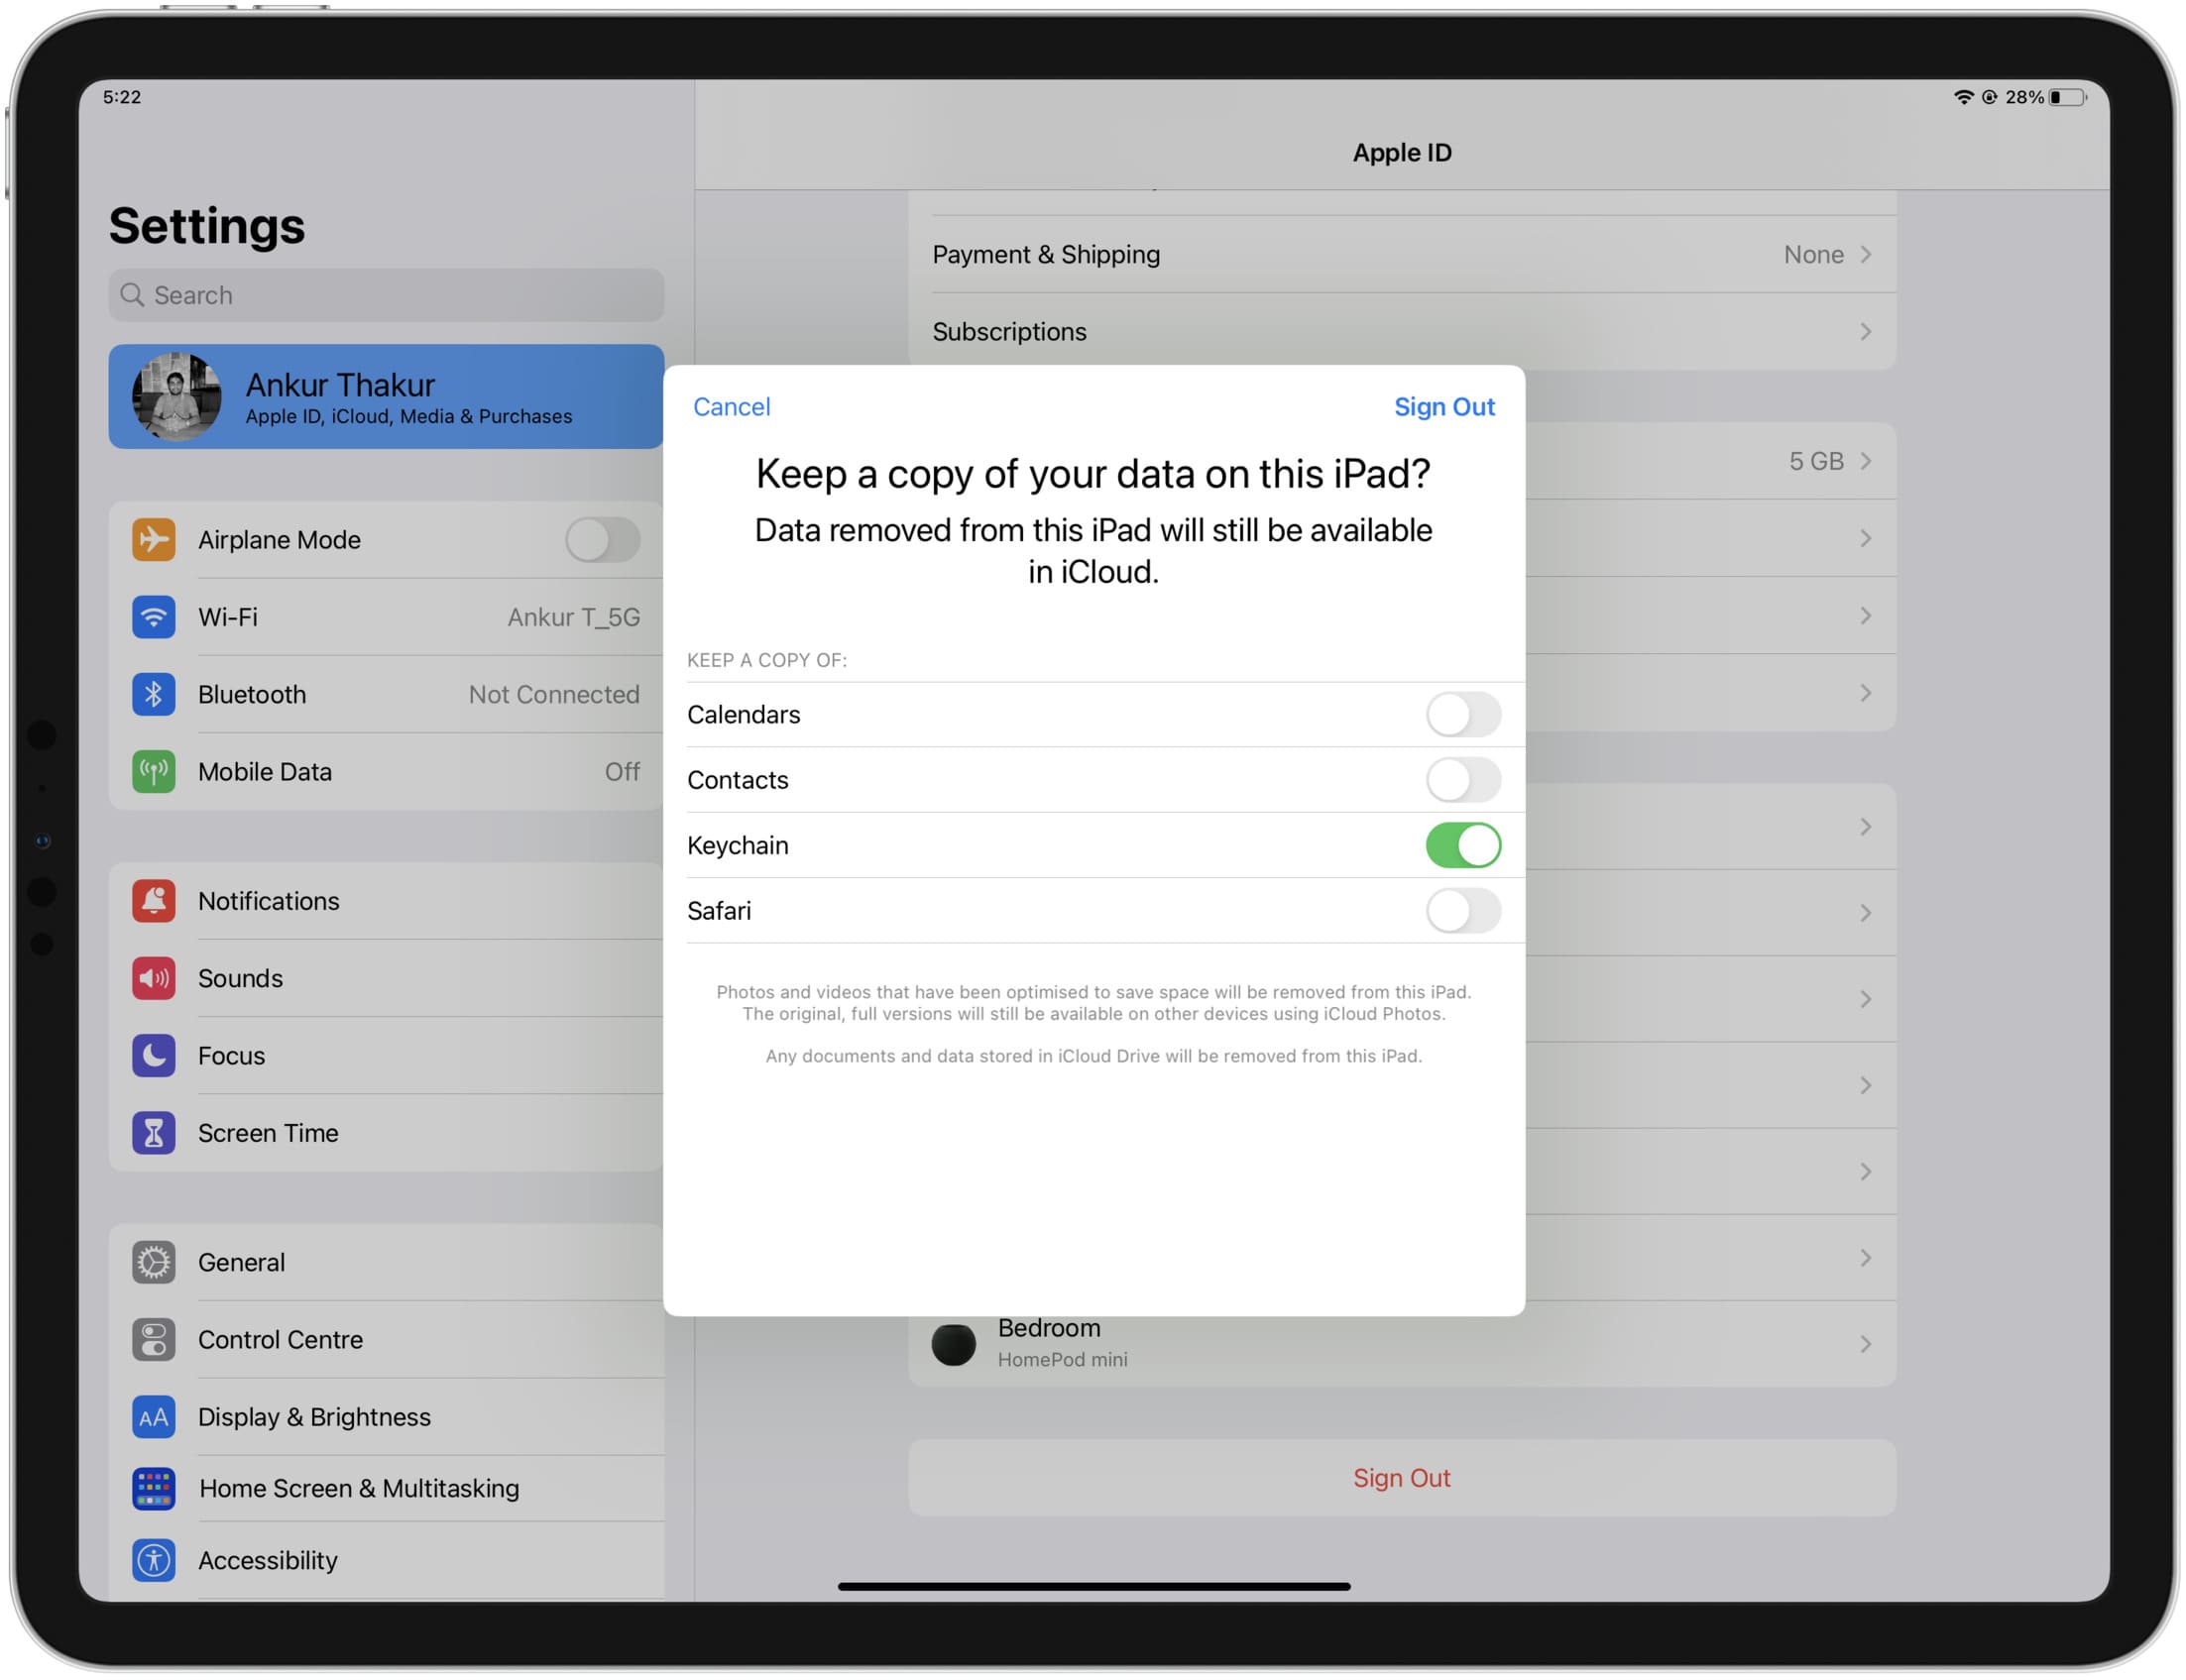 Keep Keychain passwords when signing out of iCloud on iPad